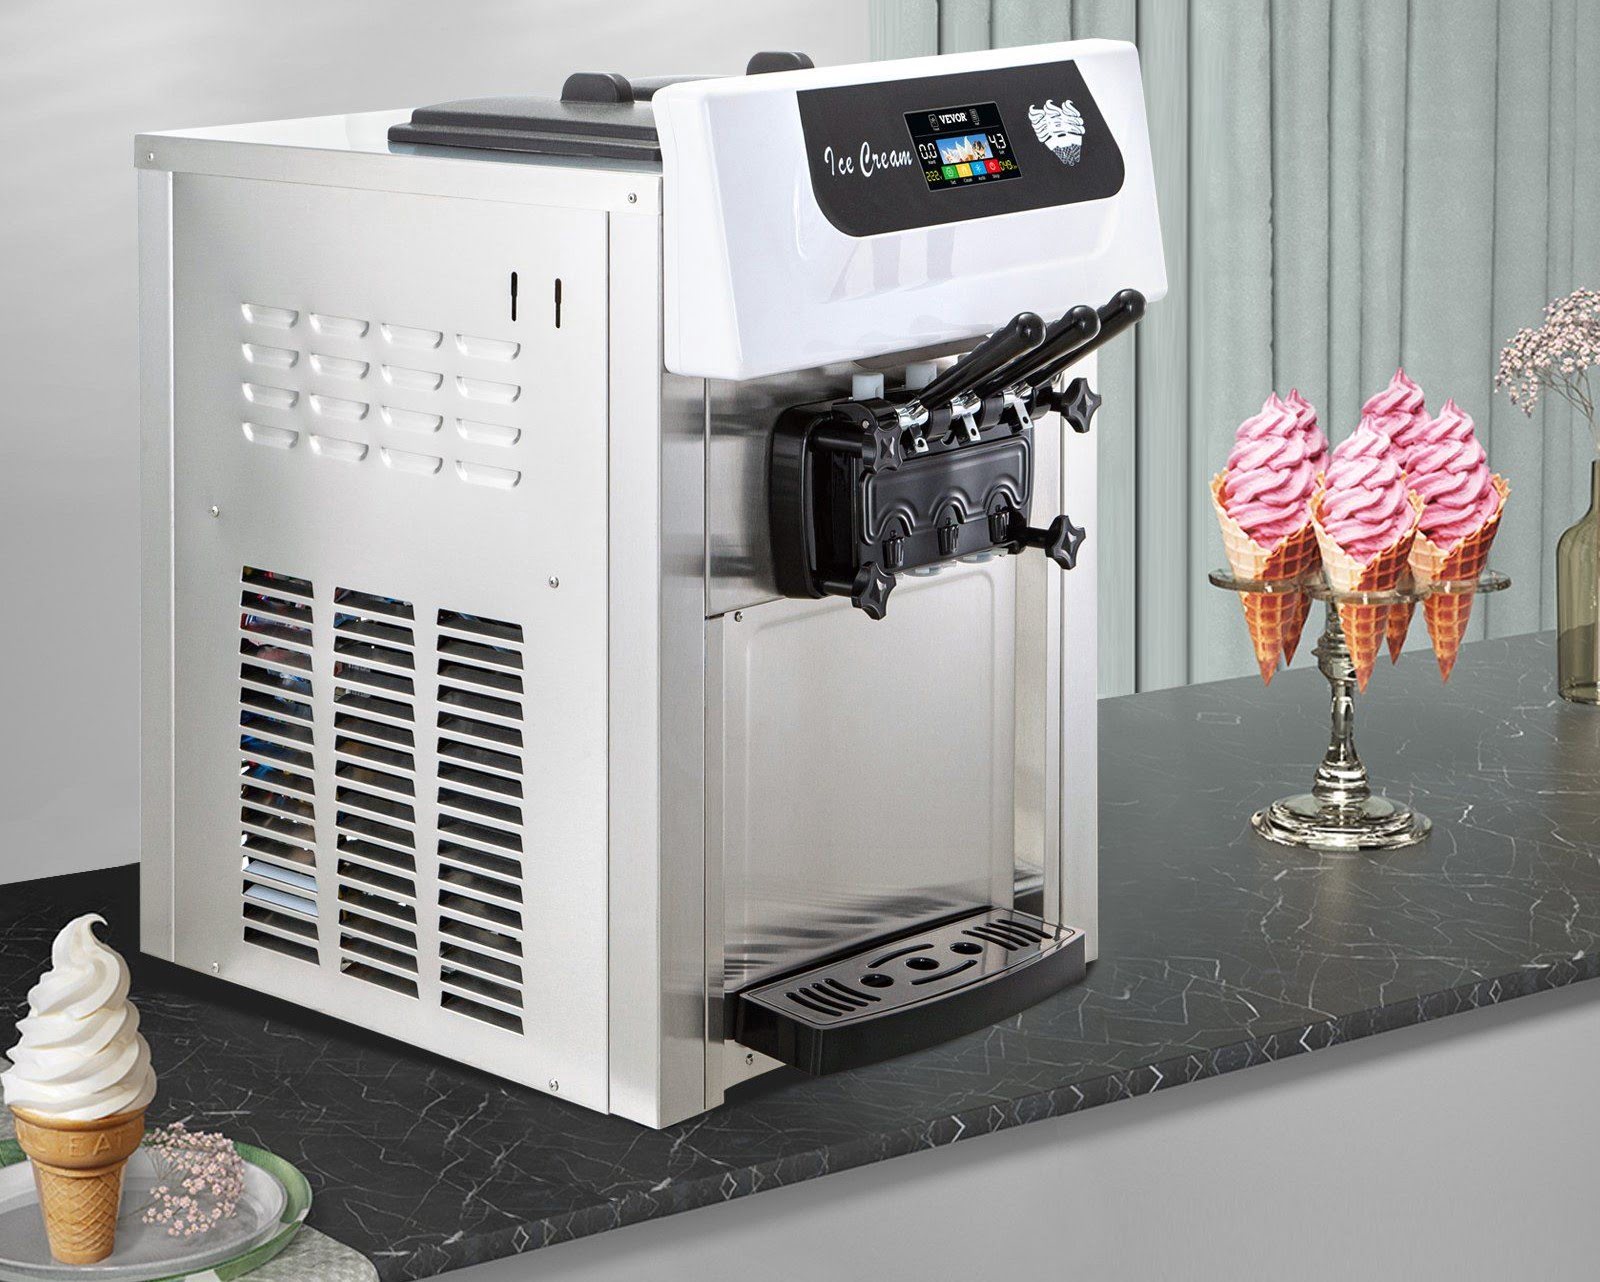 15 VEVOR Ice Cream Makers to Craft Dreamy Desserts at Home!